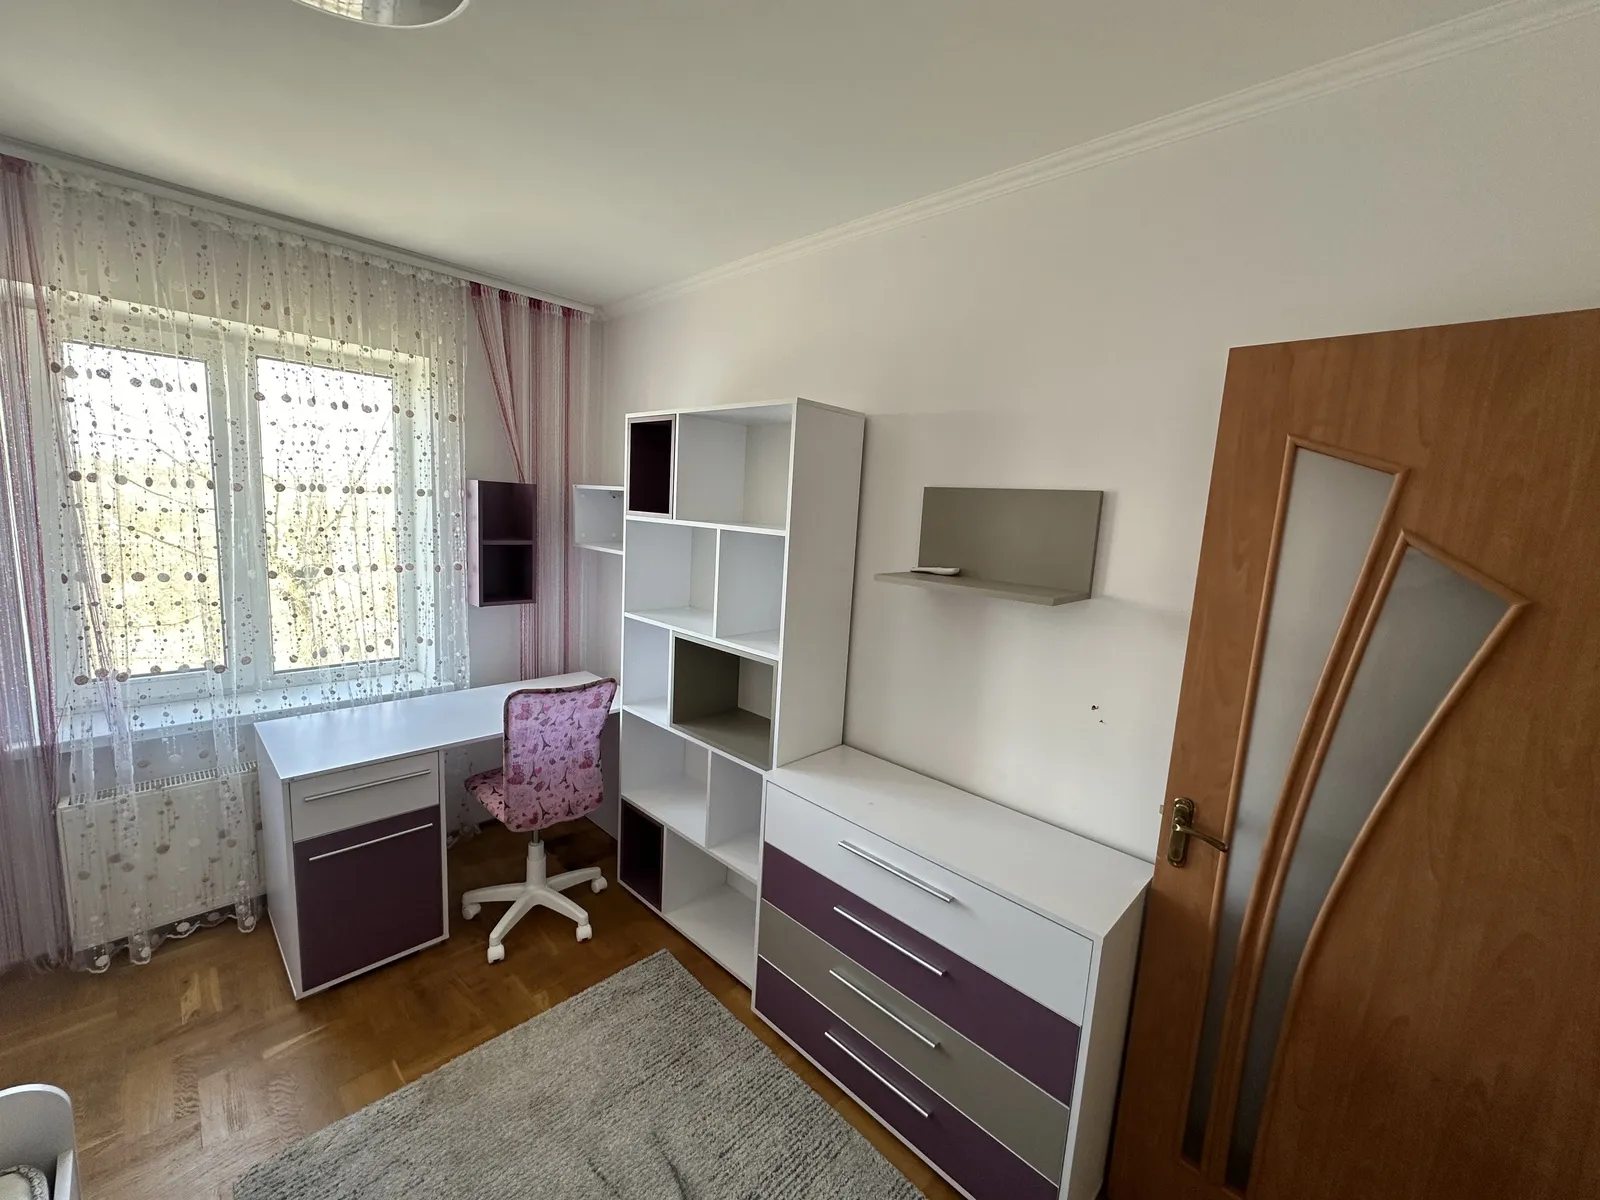 Apartment for rent. 3 rooms, 65 m², 5th floor/9 floors. Troleybusna vul., Ternopil. 